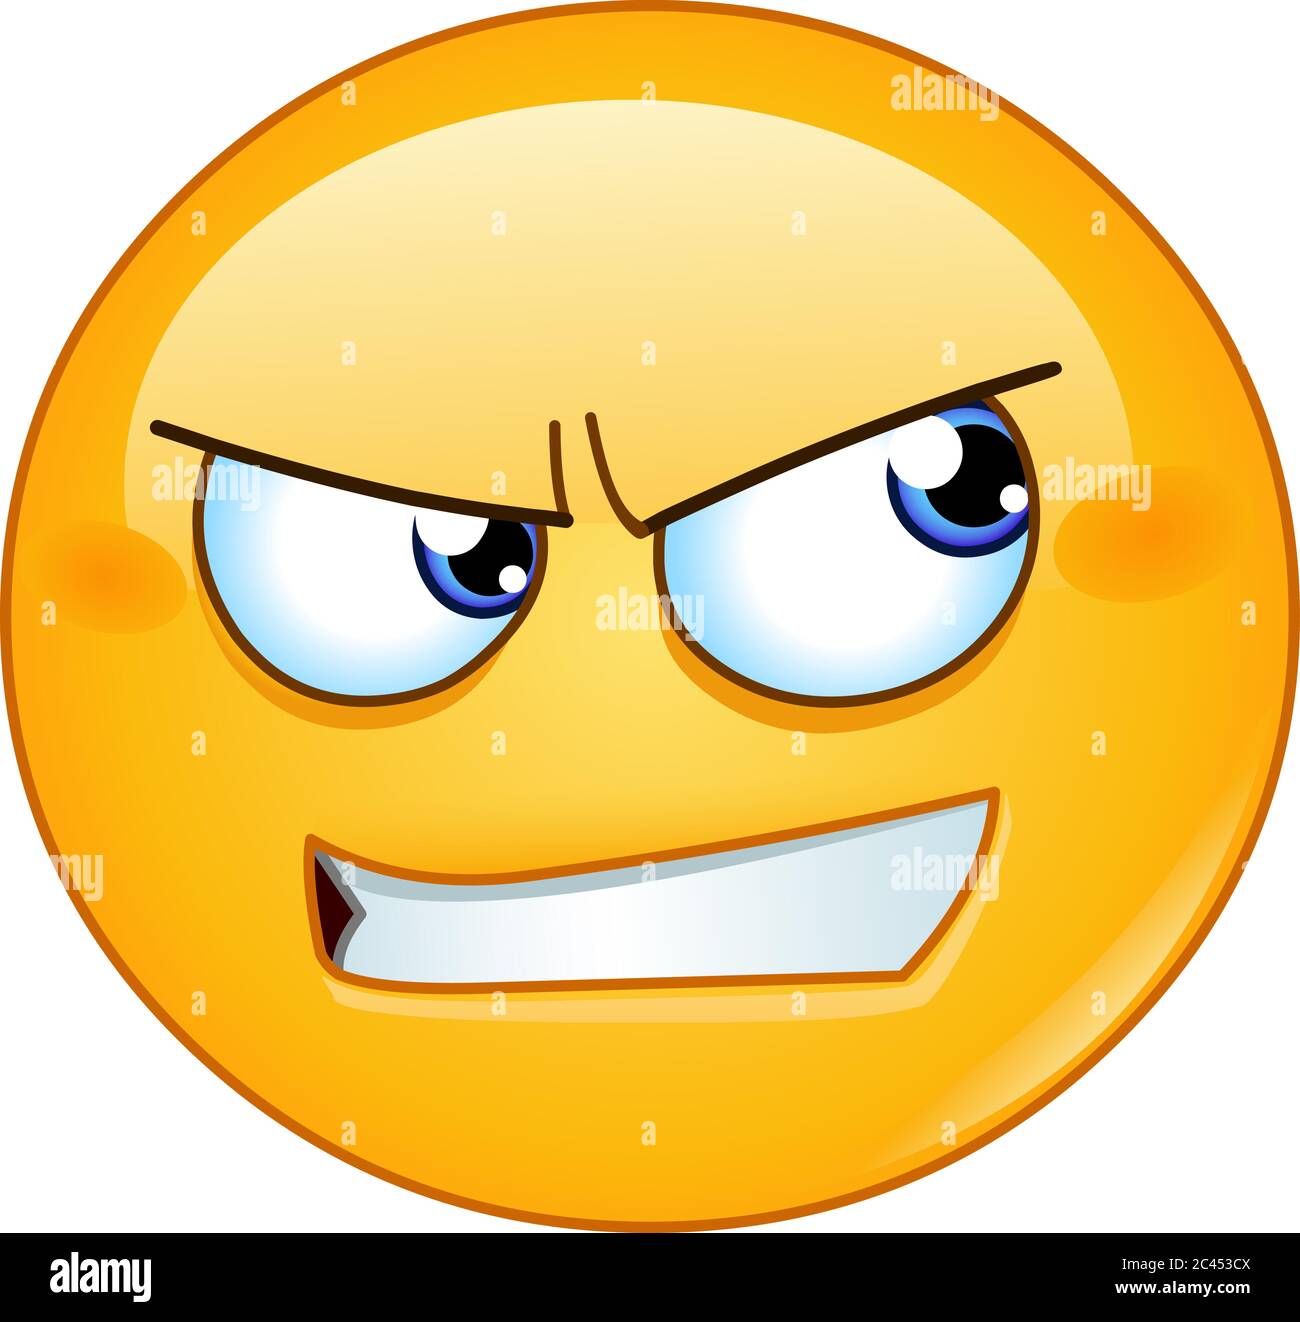 Angry emoji emoticon with bared teeth looking to the side Stock Vector